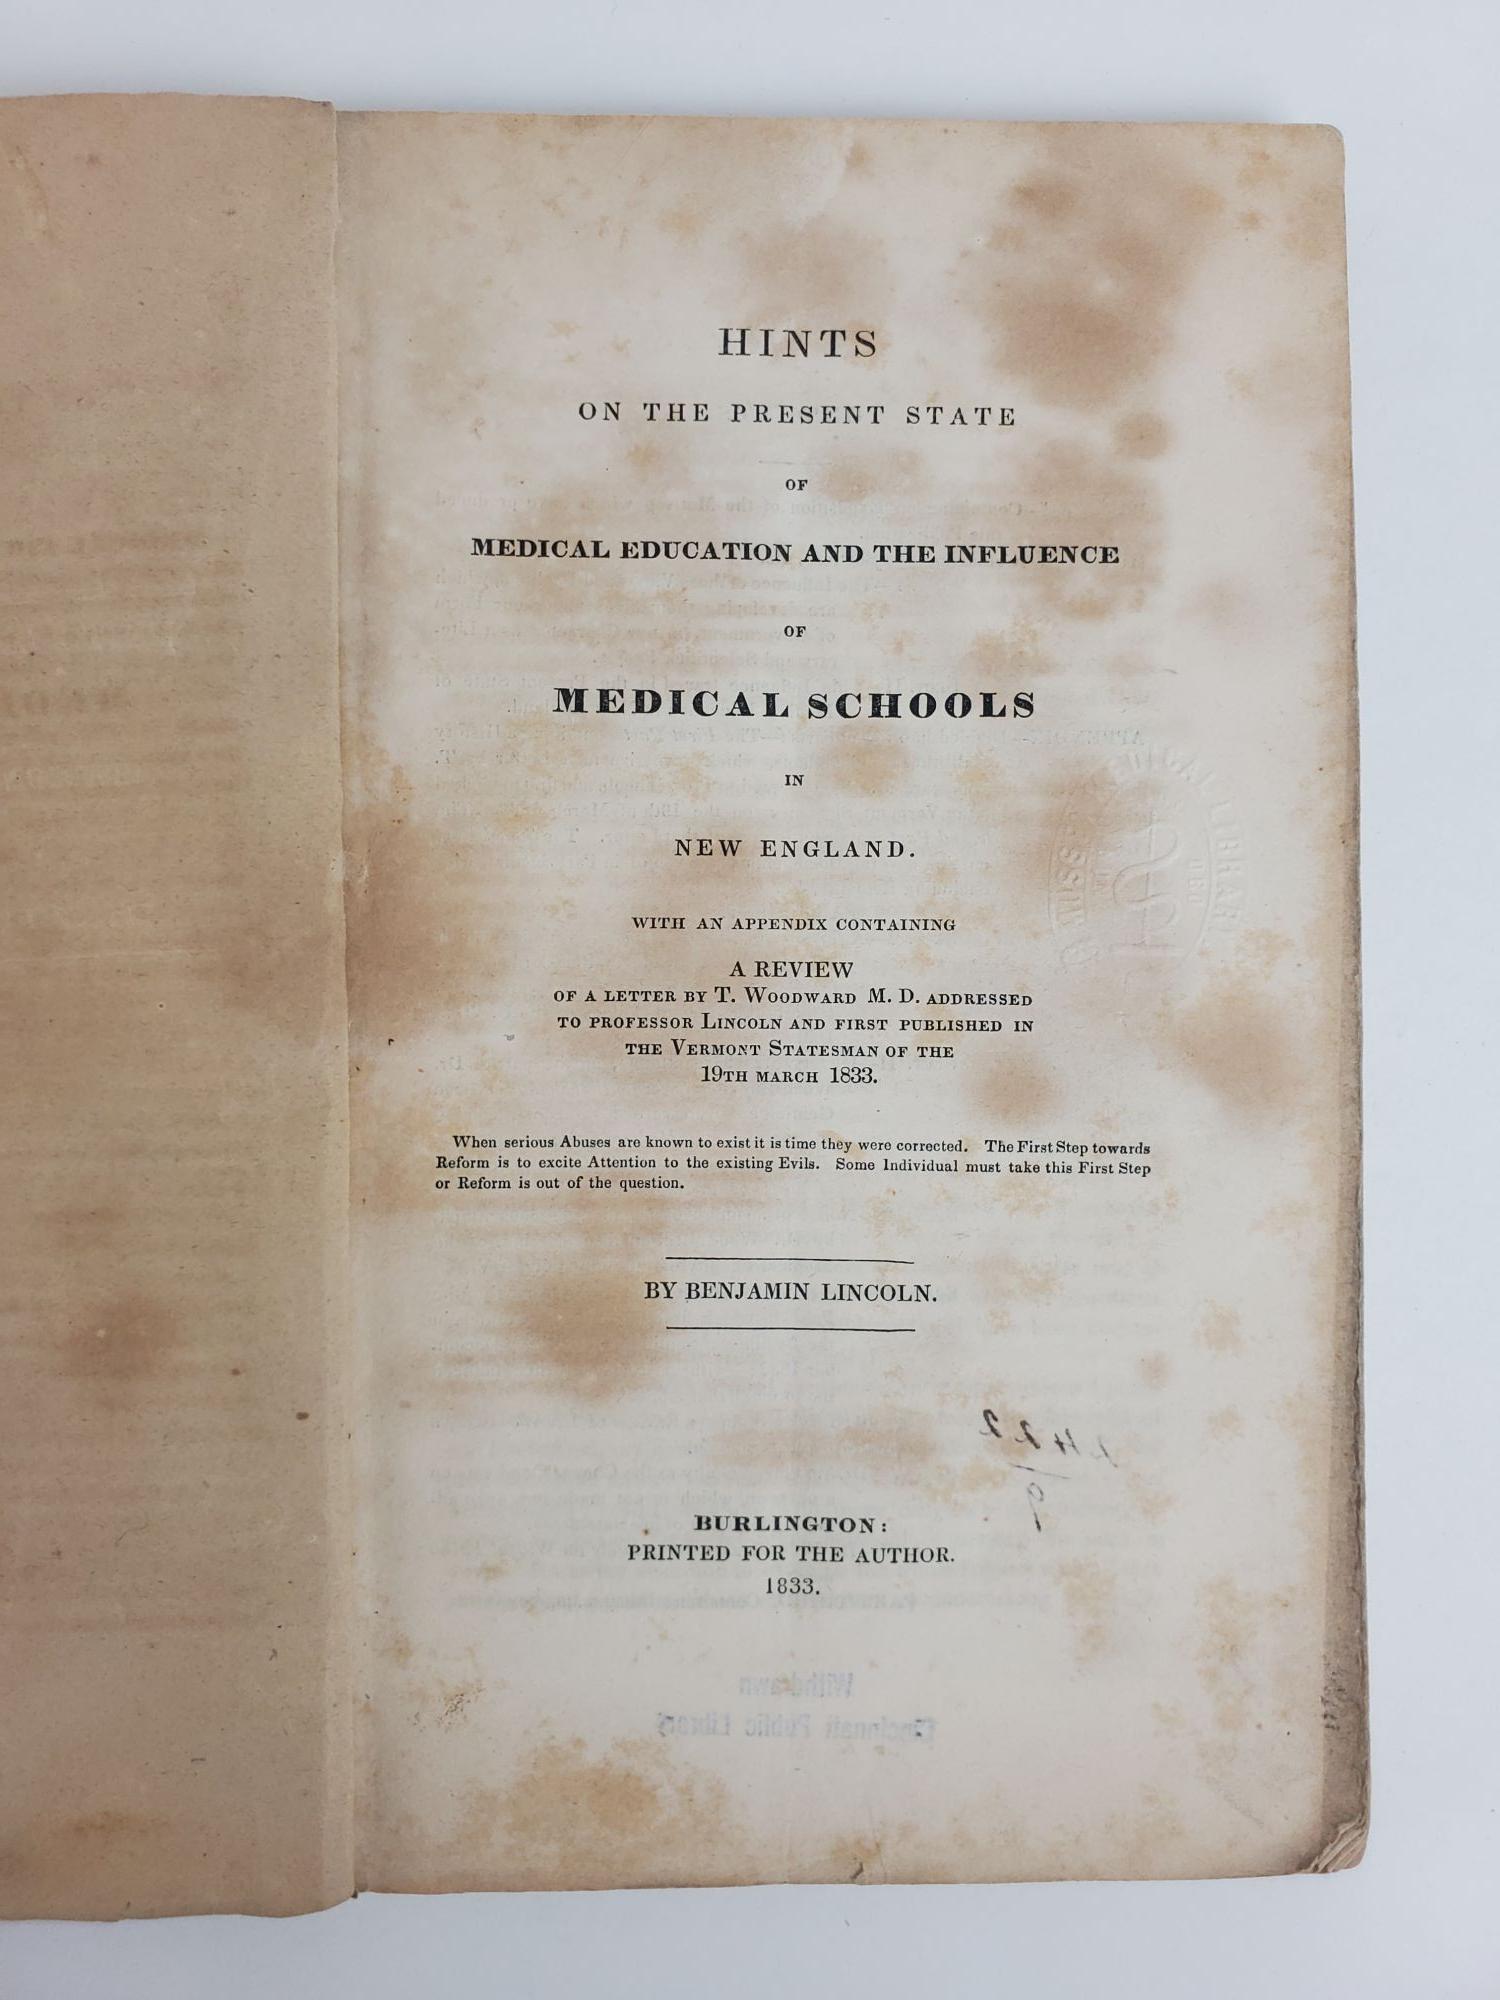 Product Image for HINTS ON THE PRESENT STATE OF MEDICAL EDUCATION AND THE INFLUENCE OF MEDICAL SCHOOLS IN NEW ENGLAND; [Bound With] DR. LINCOLN'S APPEAL, WITH DR. WOODWARD'S LETTER TO PROFESSOR LINCOLN, &C. [Inscribed]